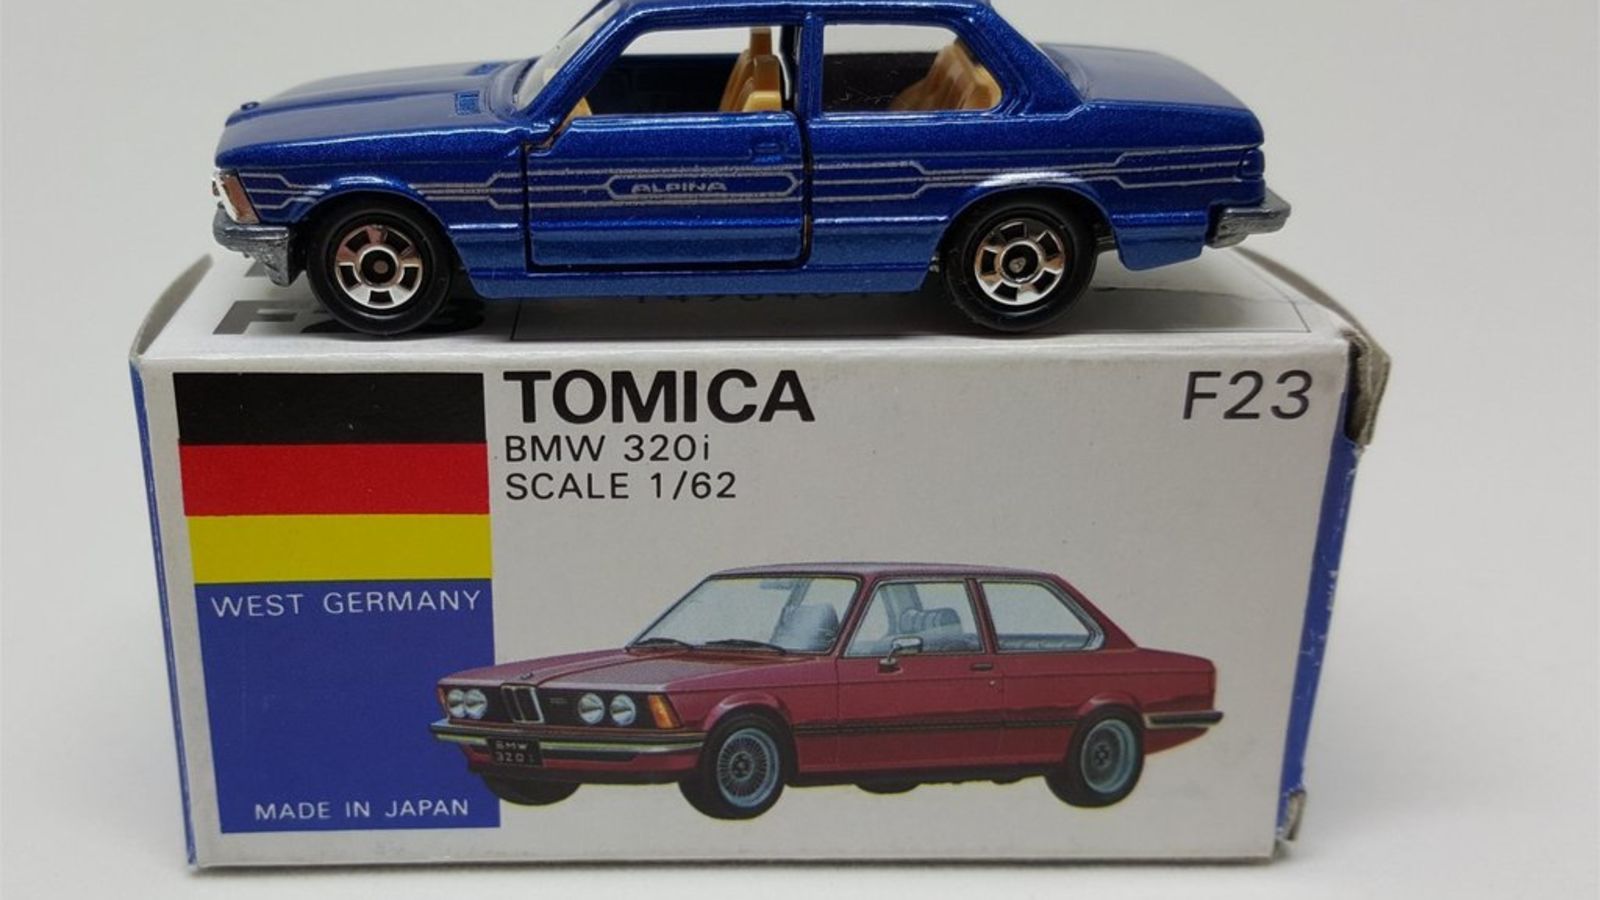 Illustration for article titled LaLD ///May: Tomica BMW 320i Alpina